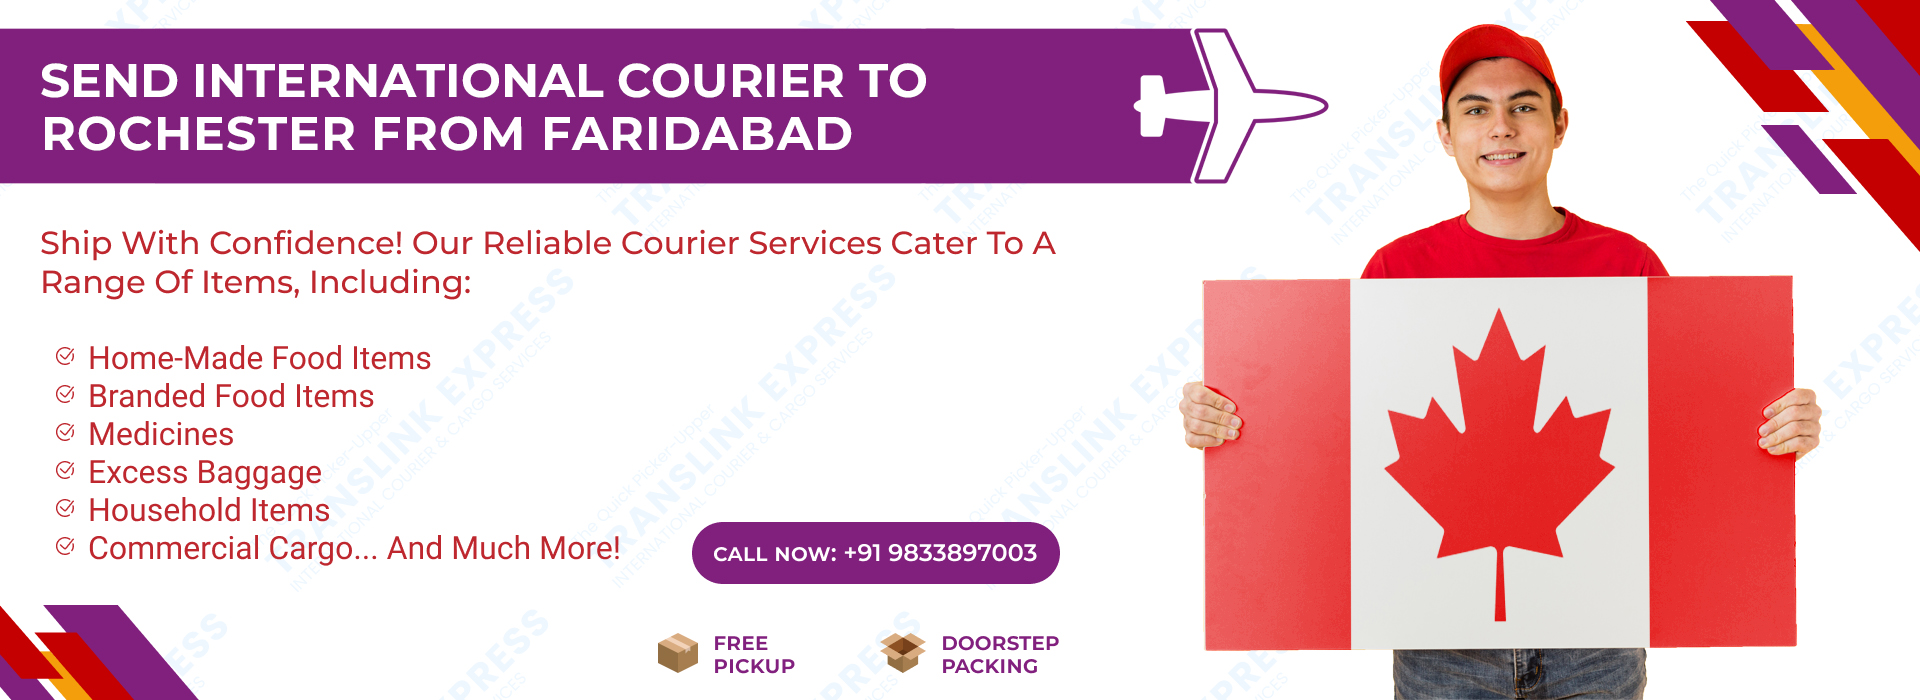 Courier to Rochester From Faridabad